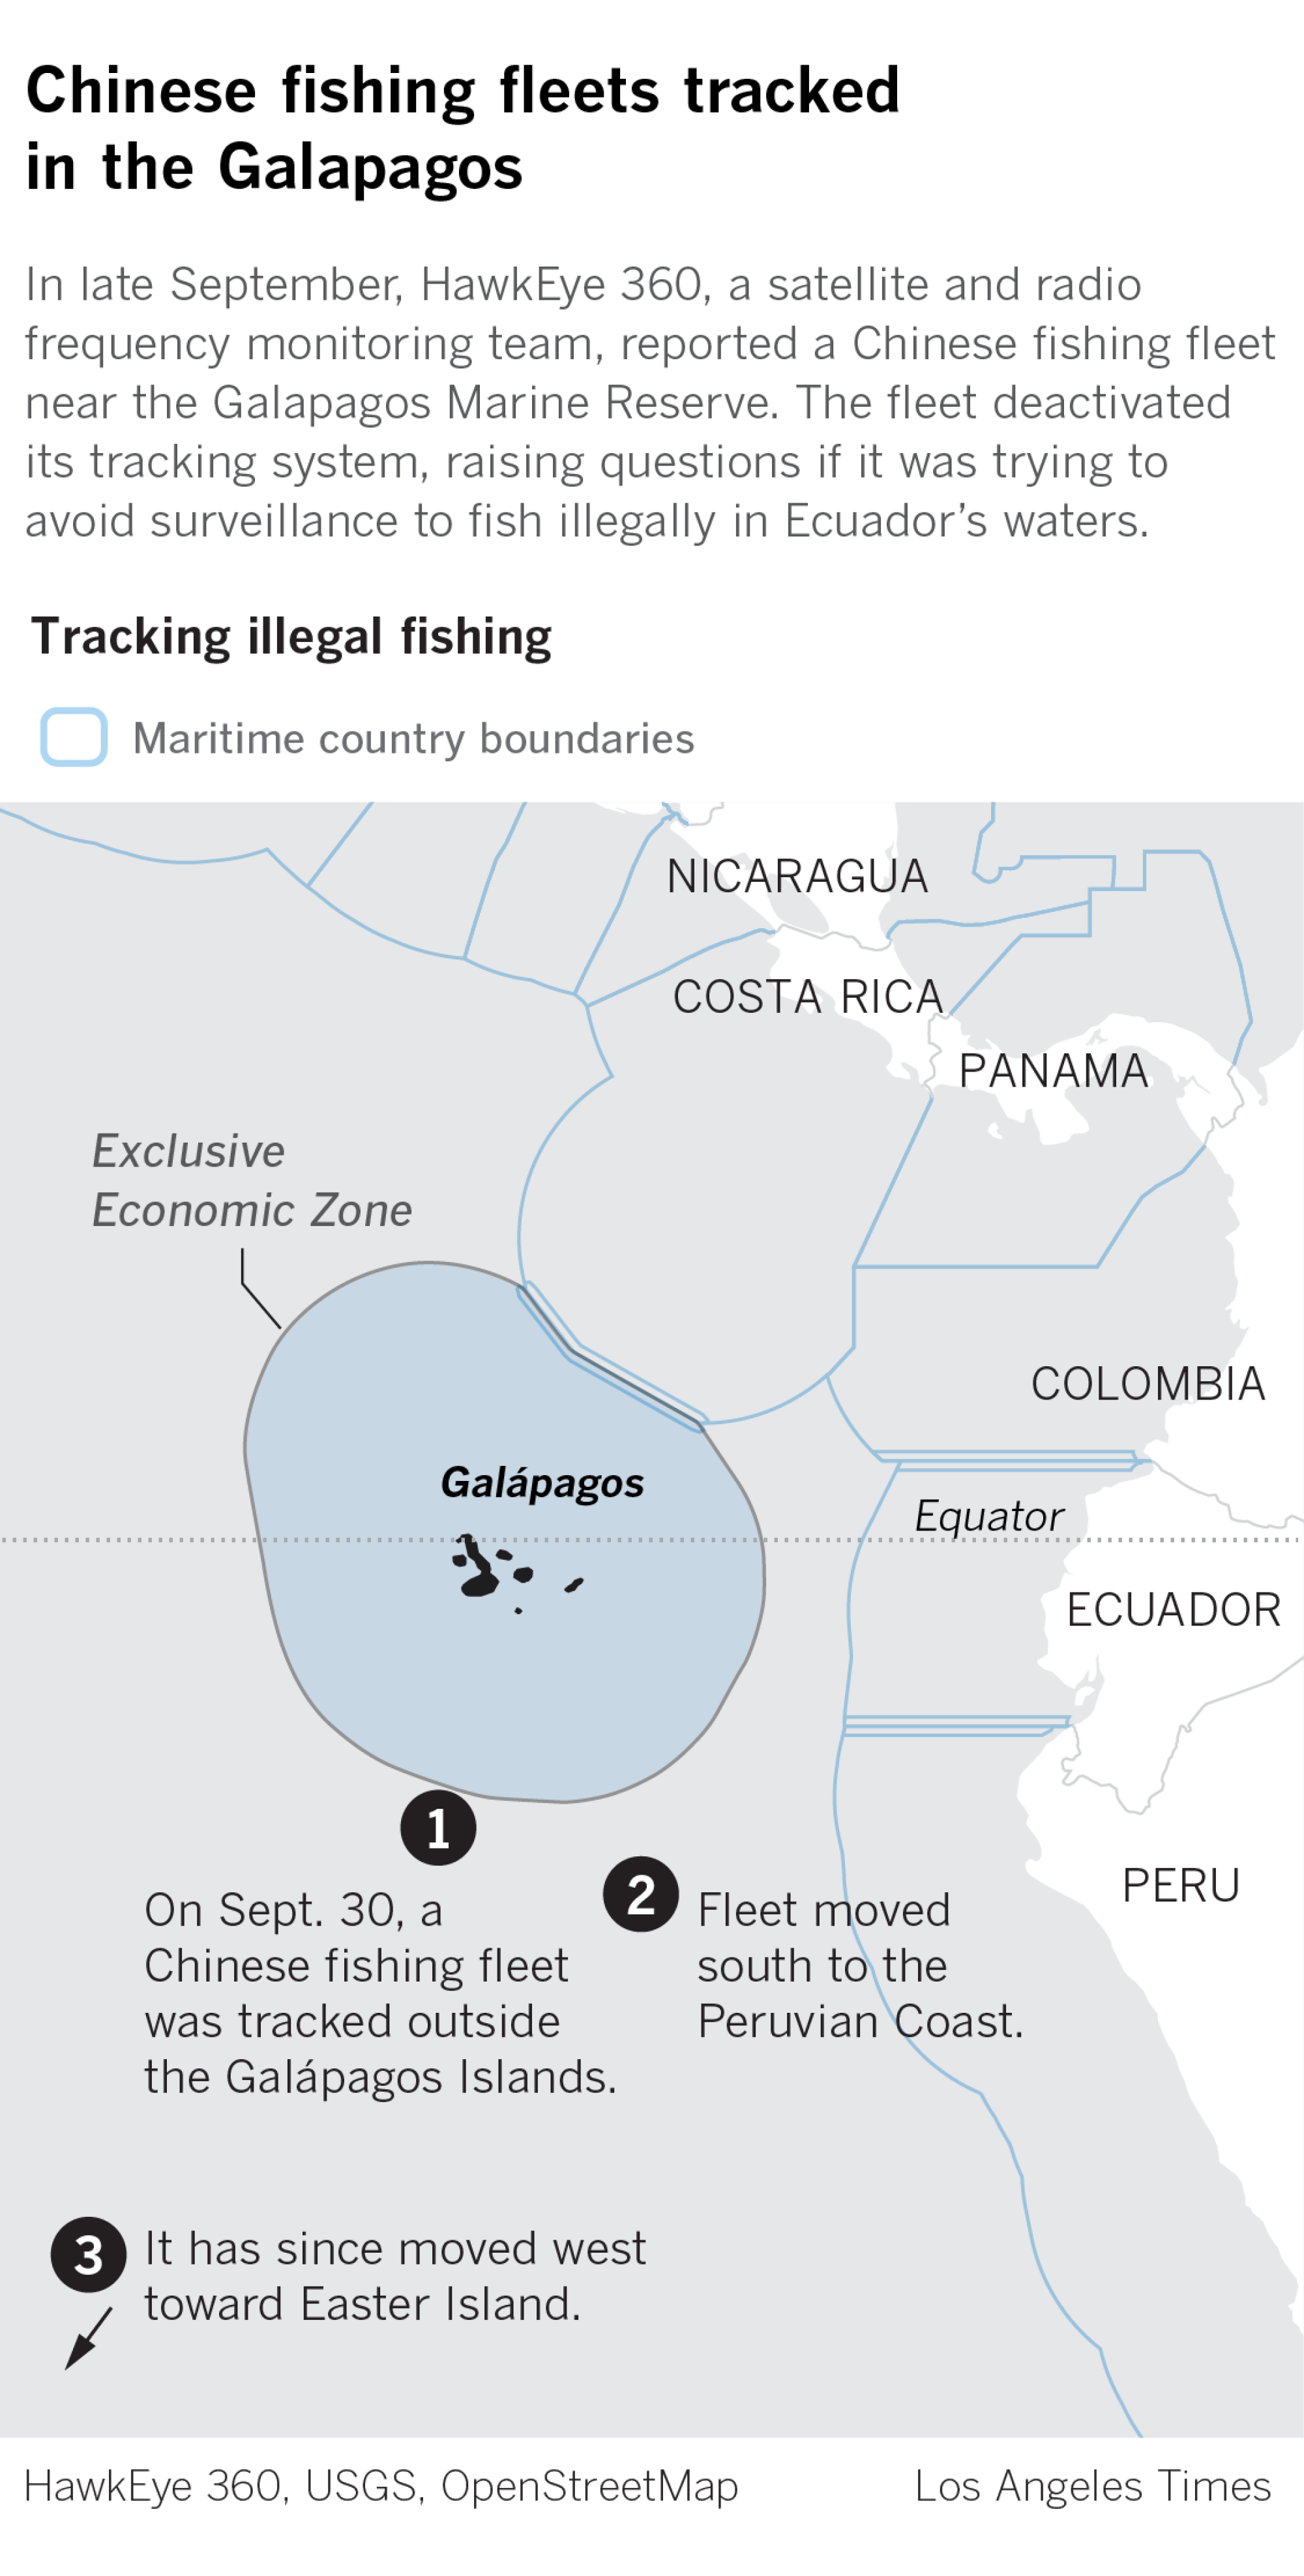 Map of Galapagos Islands shows where Chinese fishing fleet was tracked near waters off limits to fishing